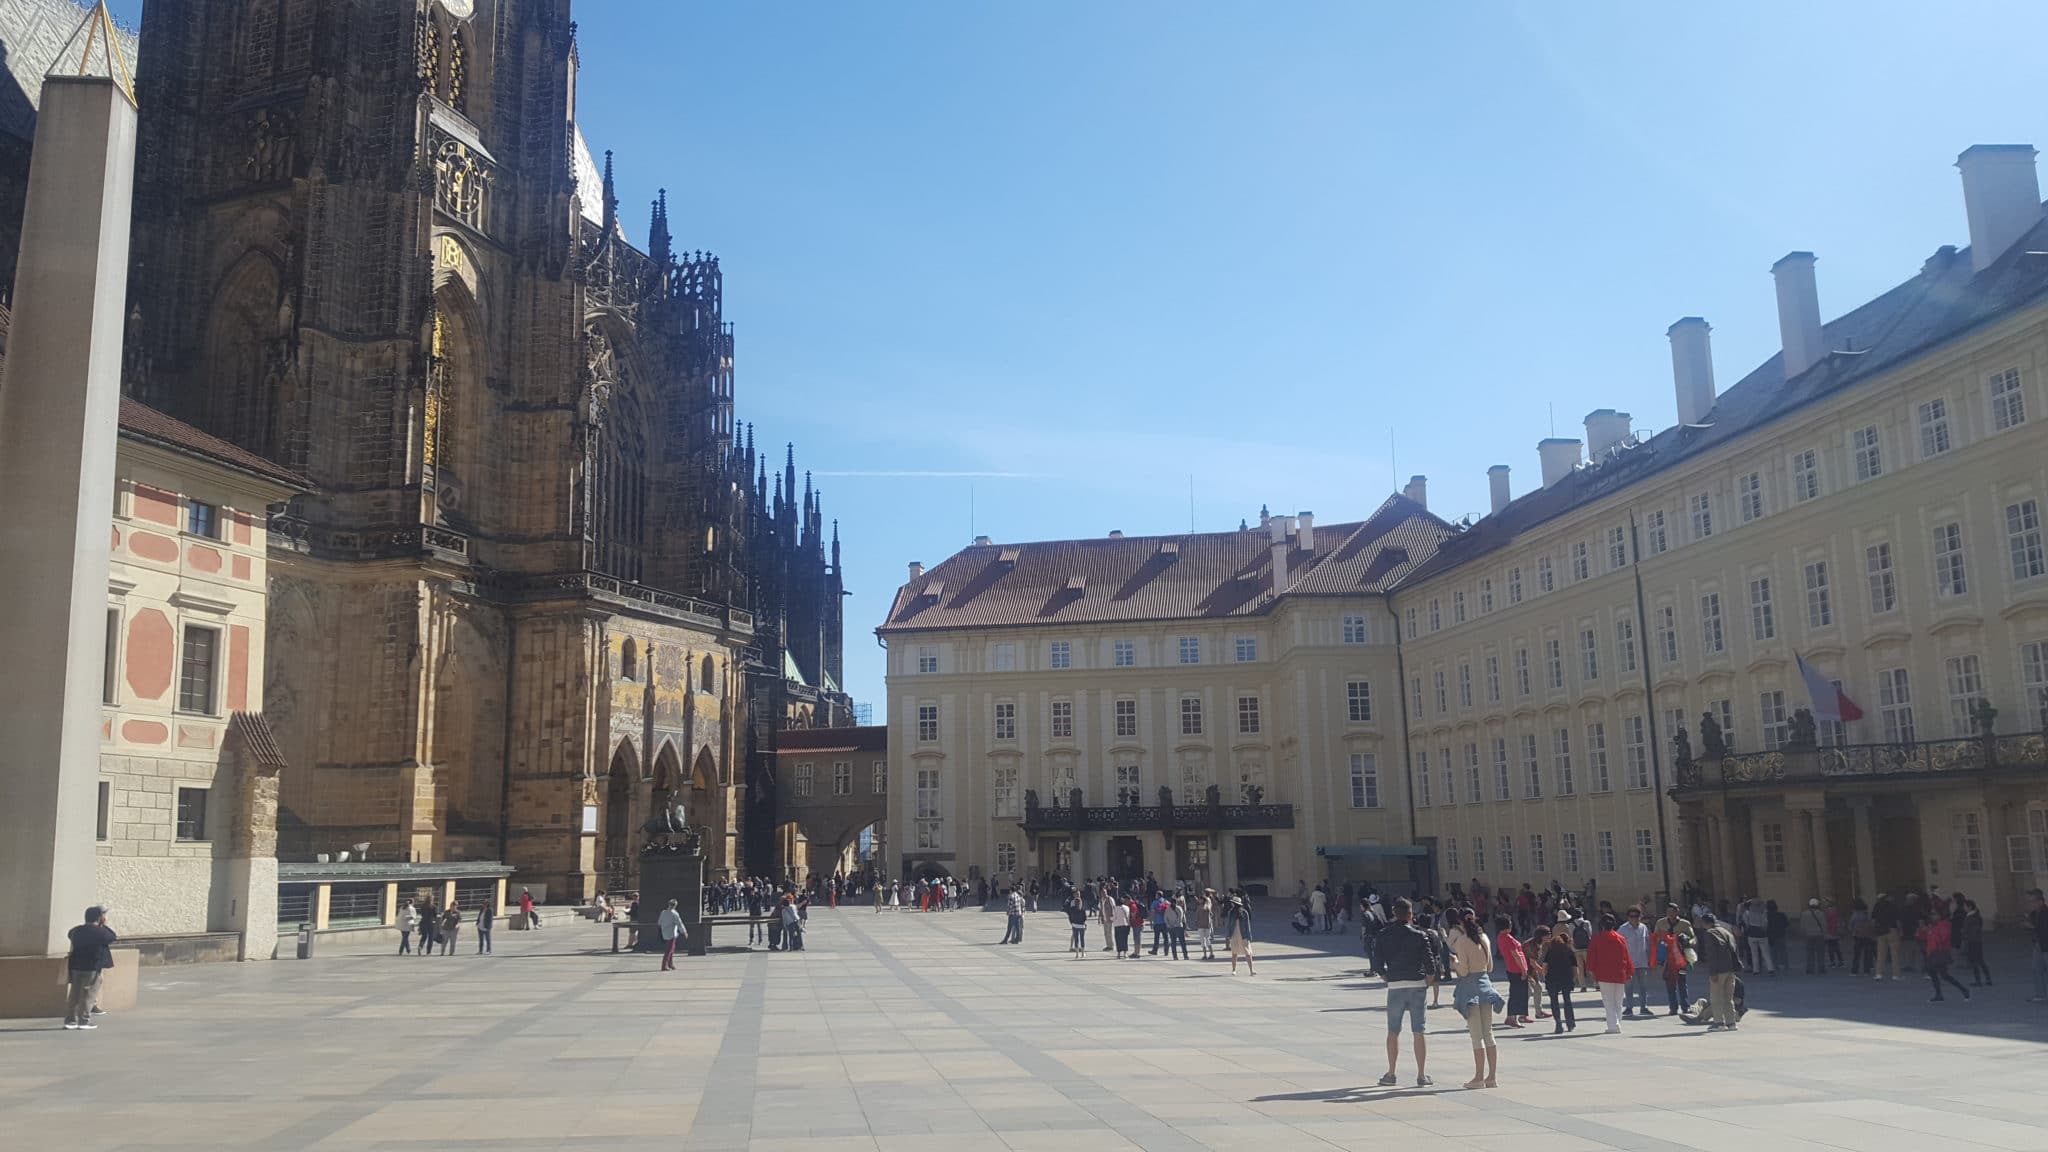 Castle Quarter - Top 10 Things to See and Do in Prague